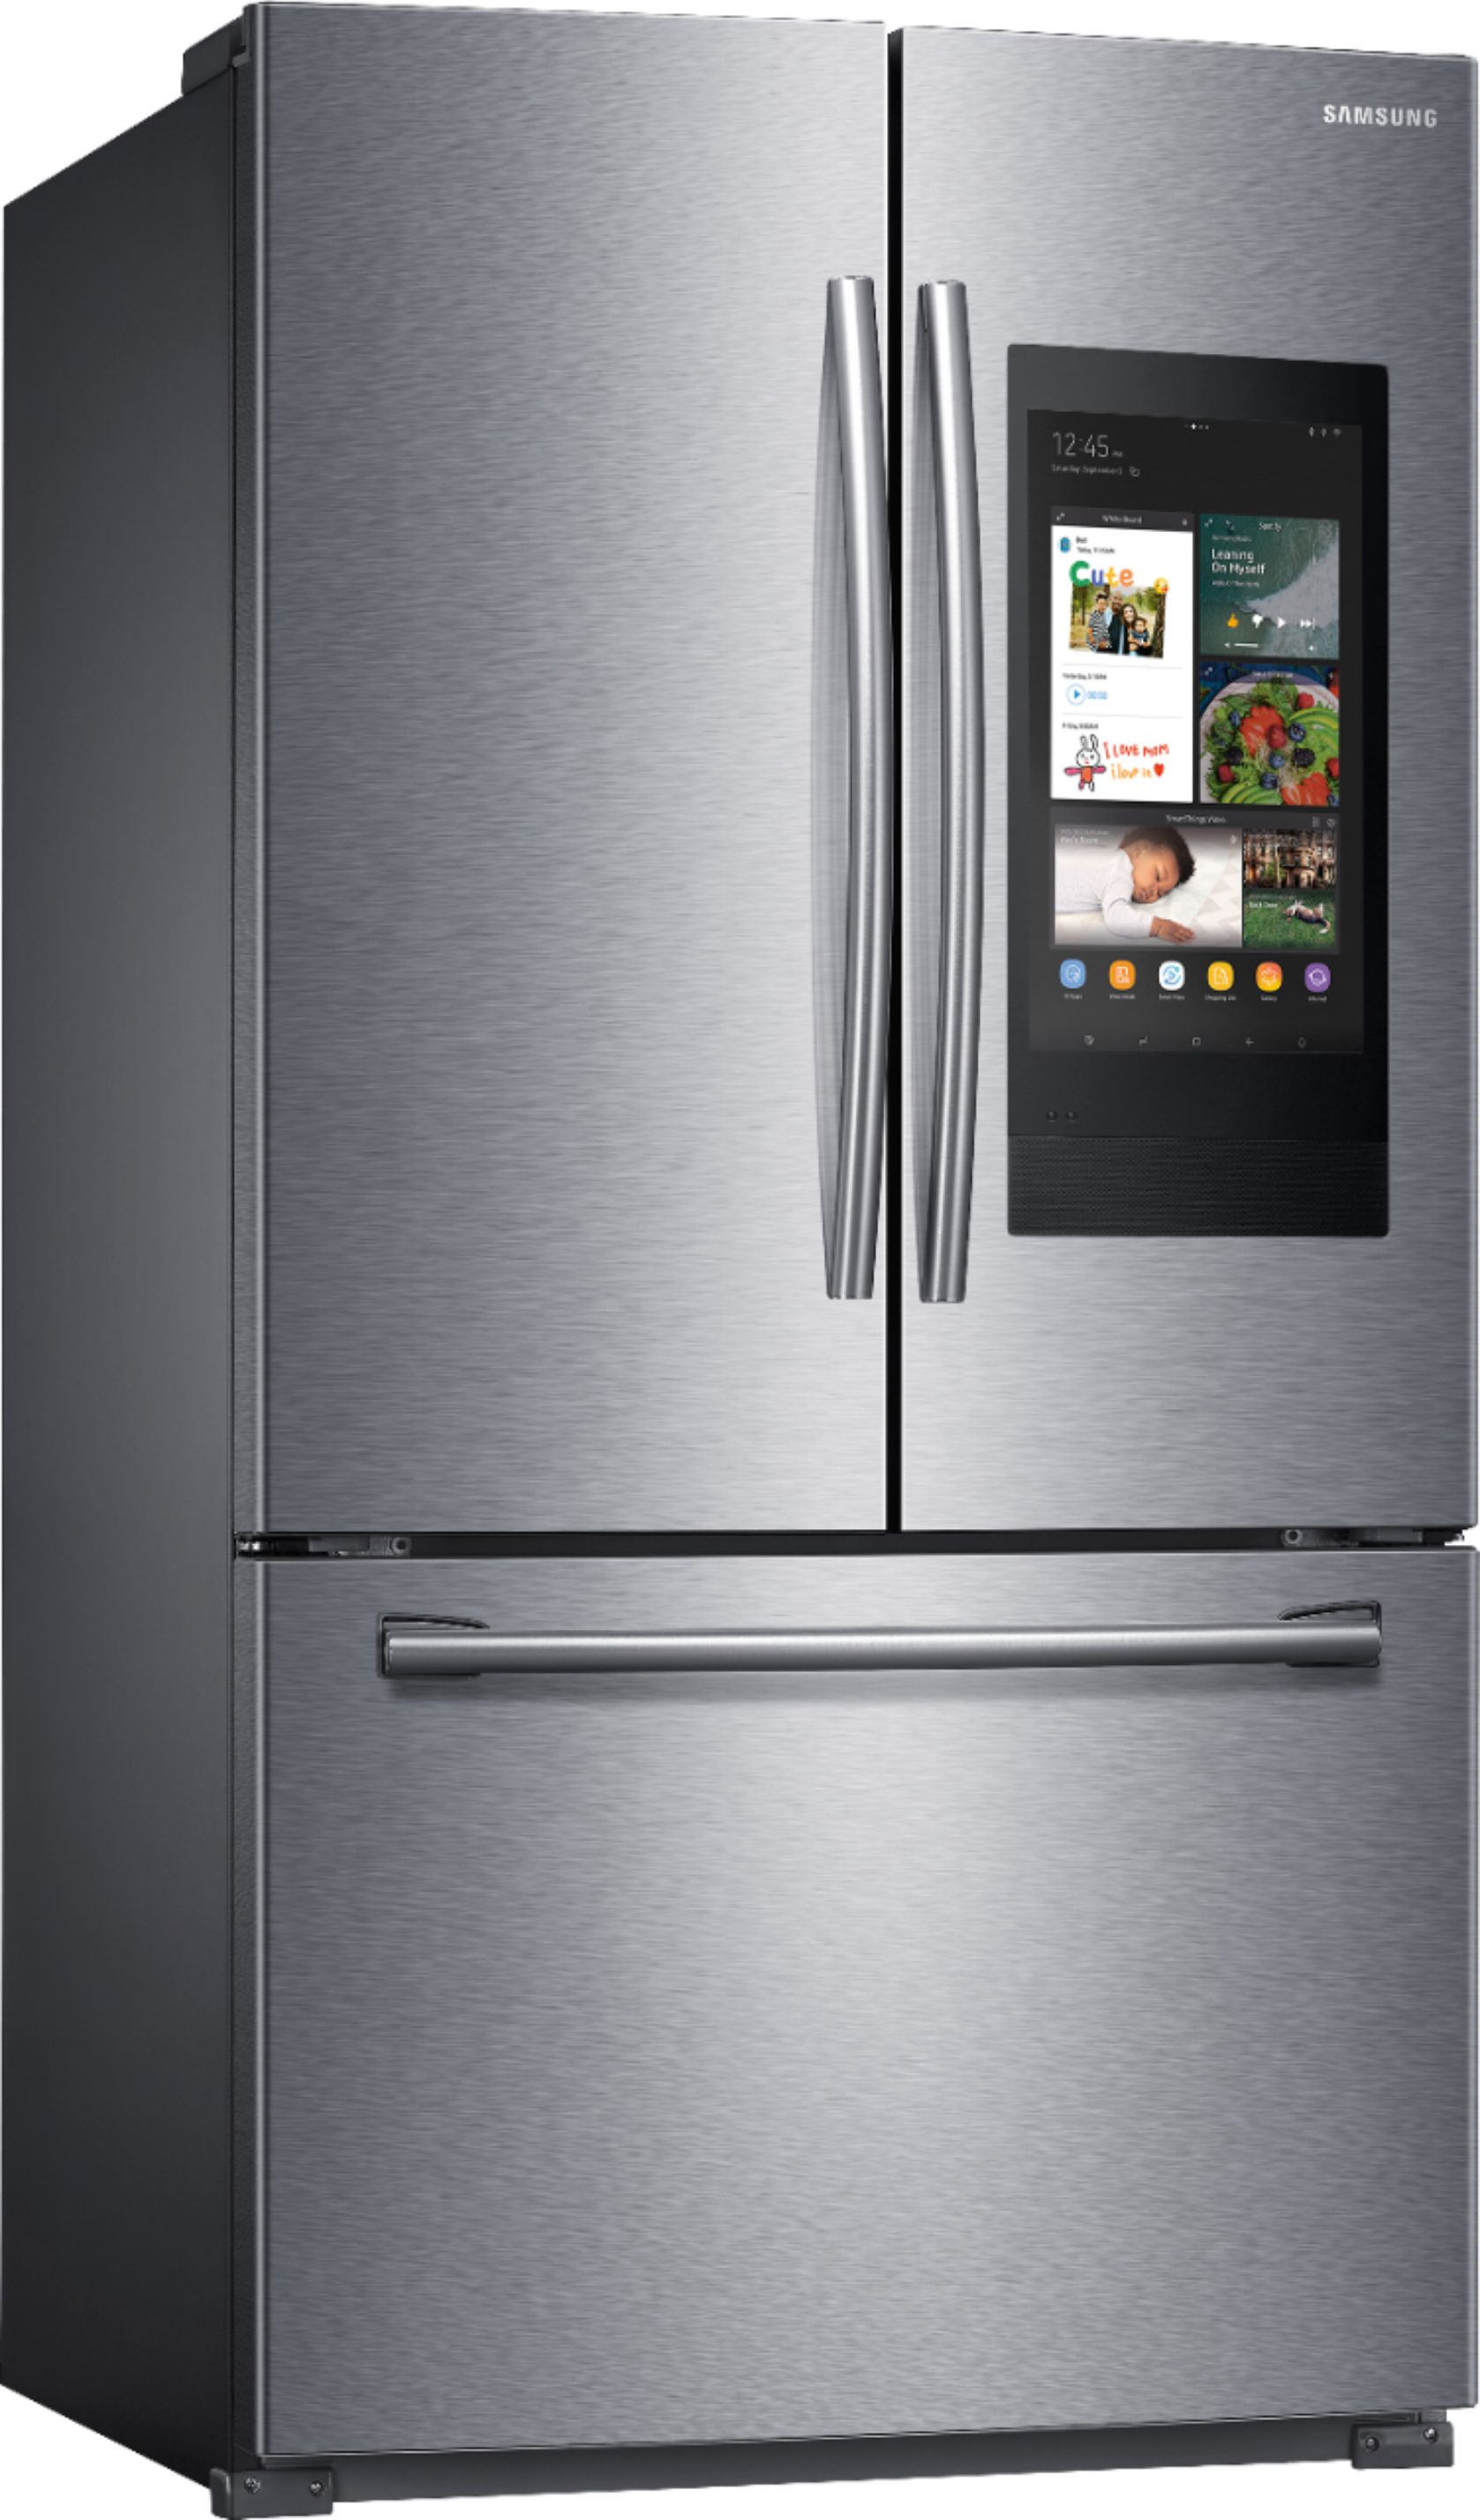 Angle View: Samsung - 28 cu. ft. Large Capacity 3-Door French Door Refrigerator - White